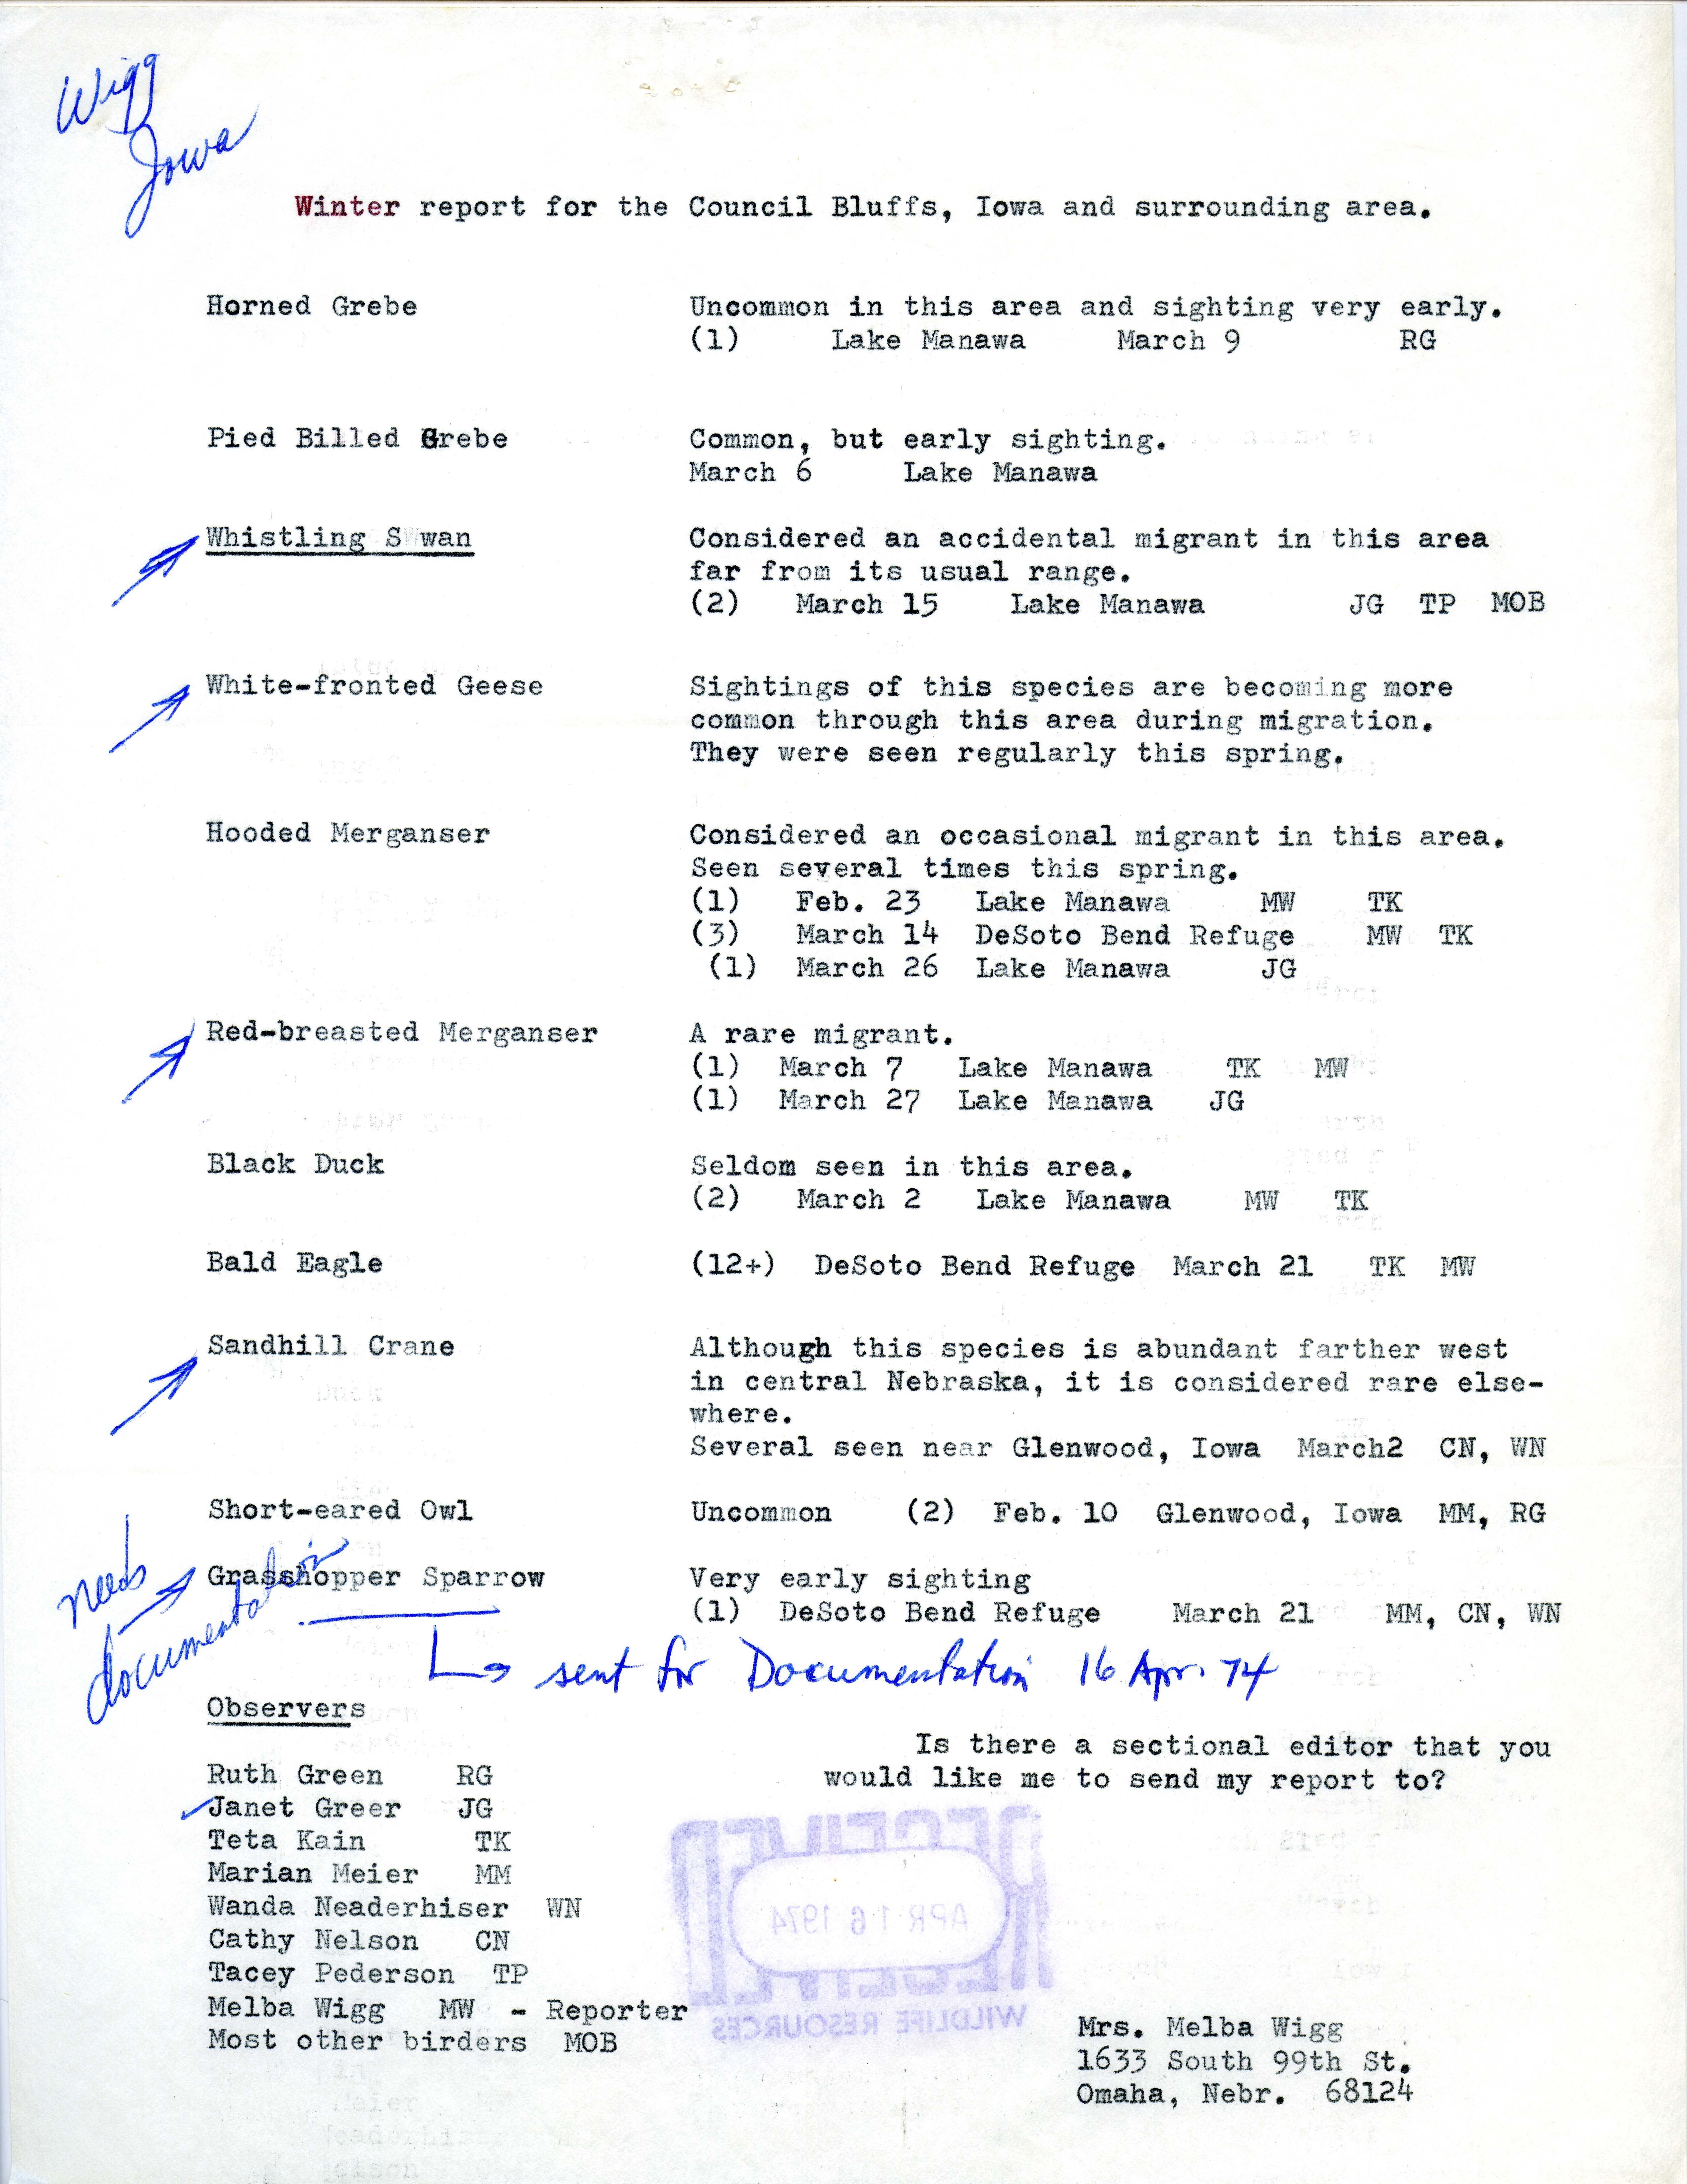 Winter report for Council Bluffs, Iowa and surrounding area, 1974